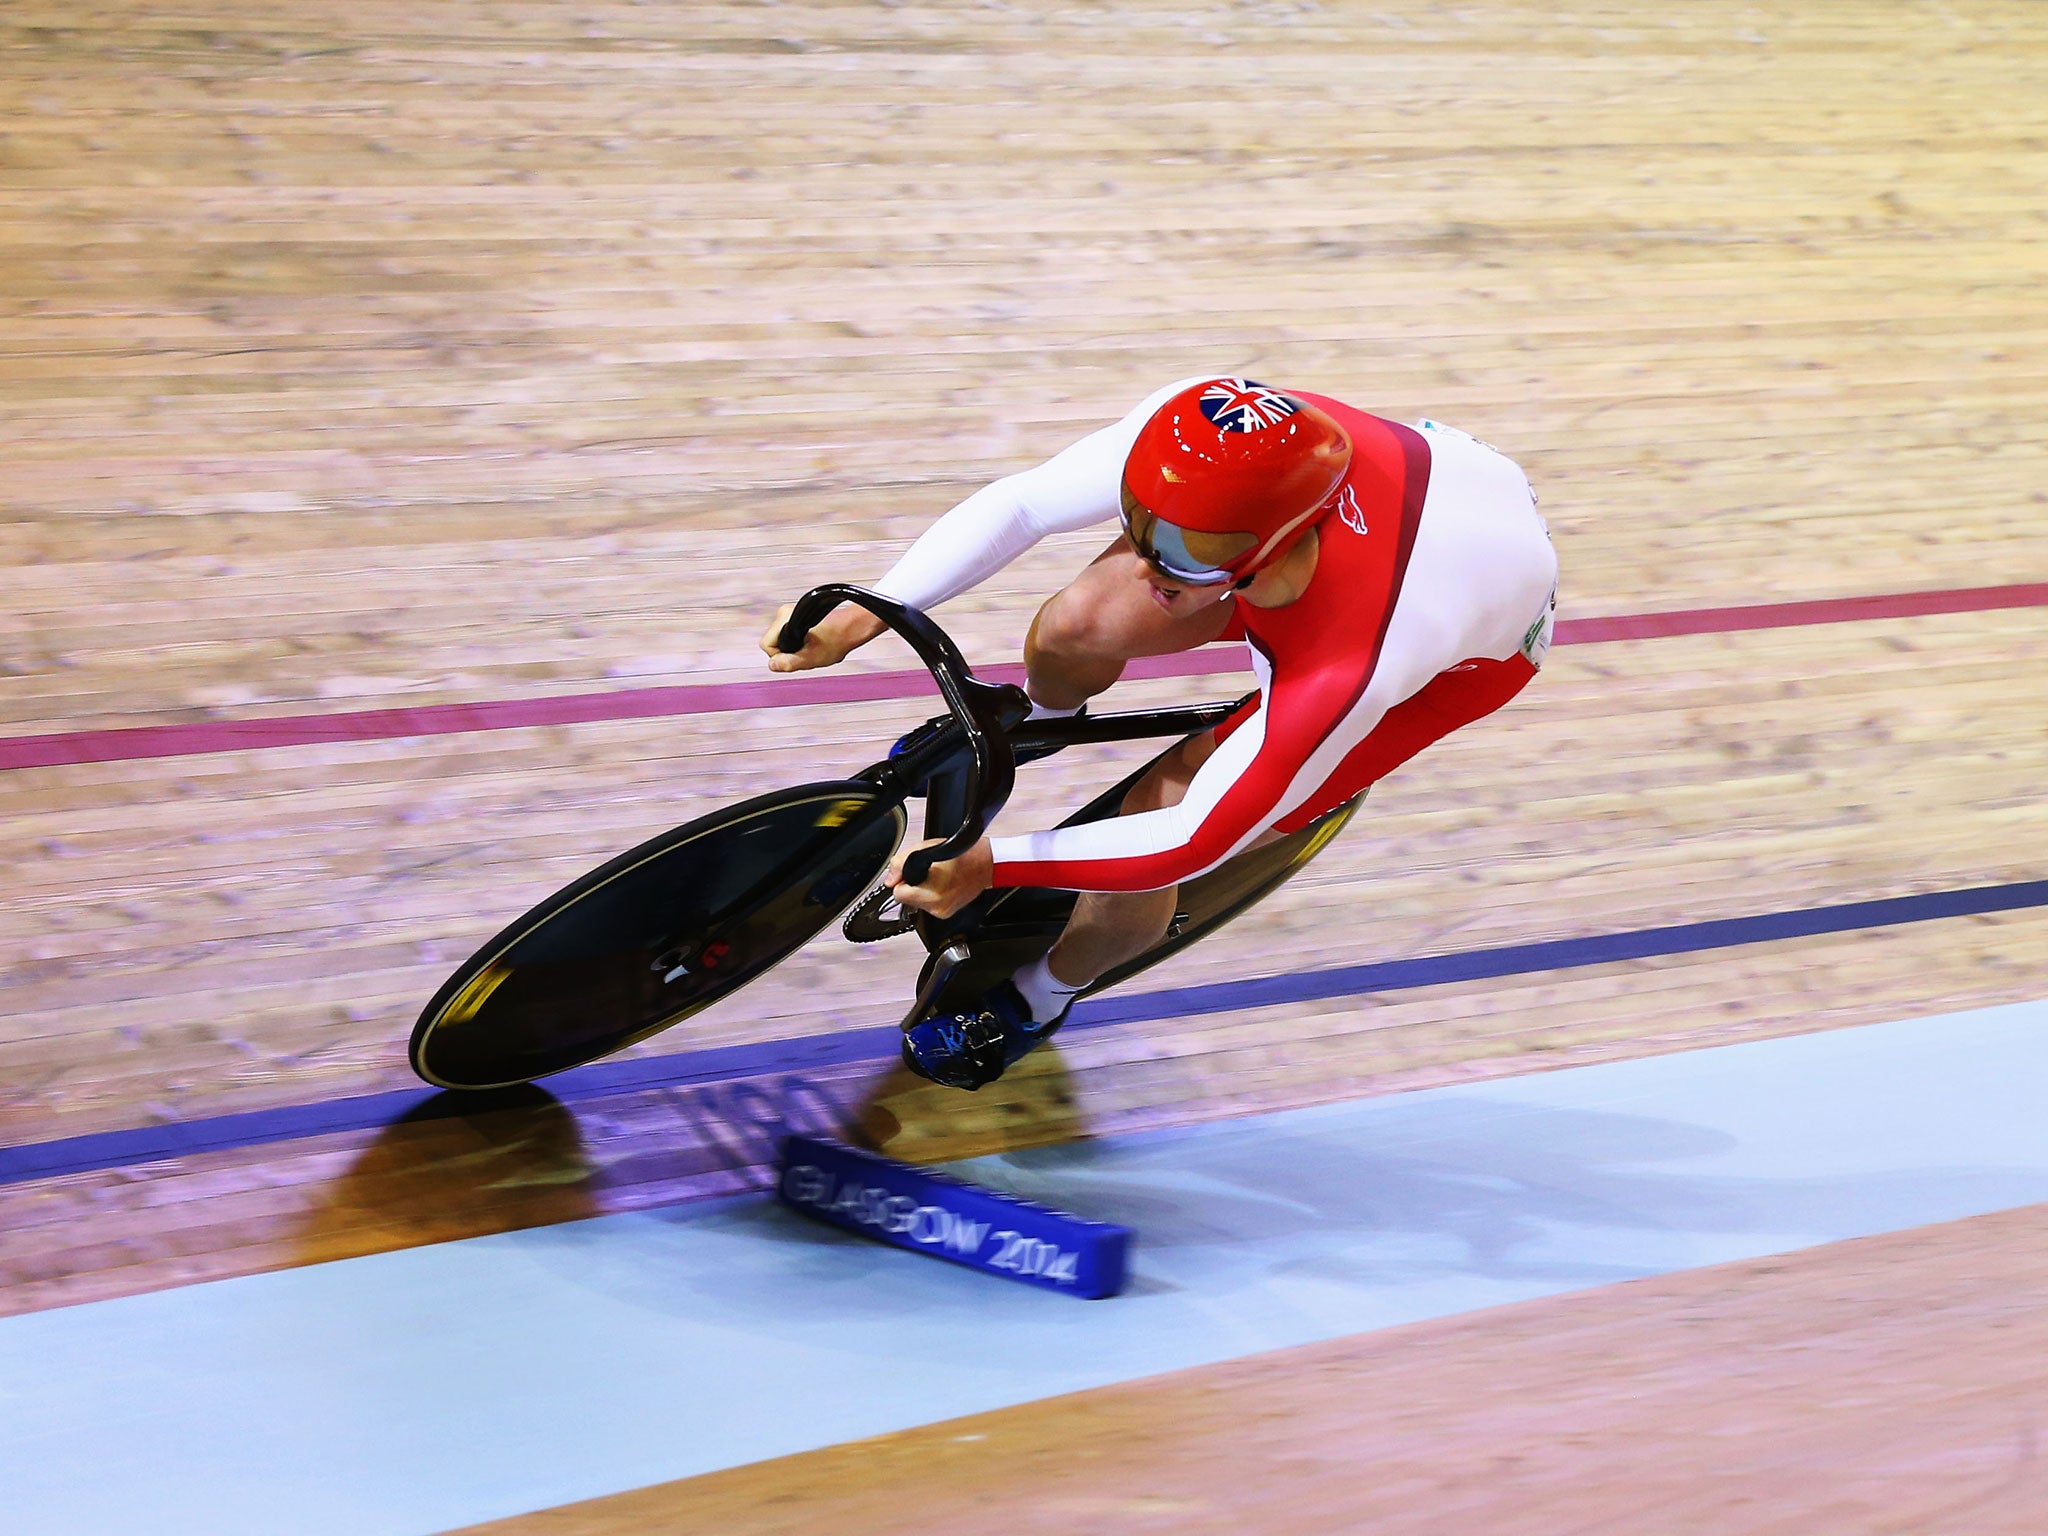 England's Jason Kenny finished 11th in the men's sprint qualifying